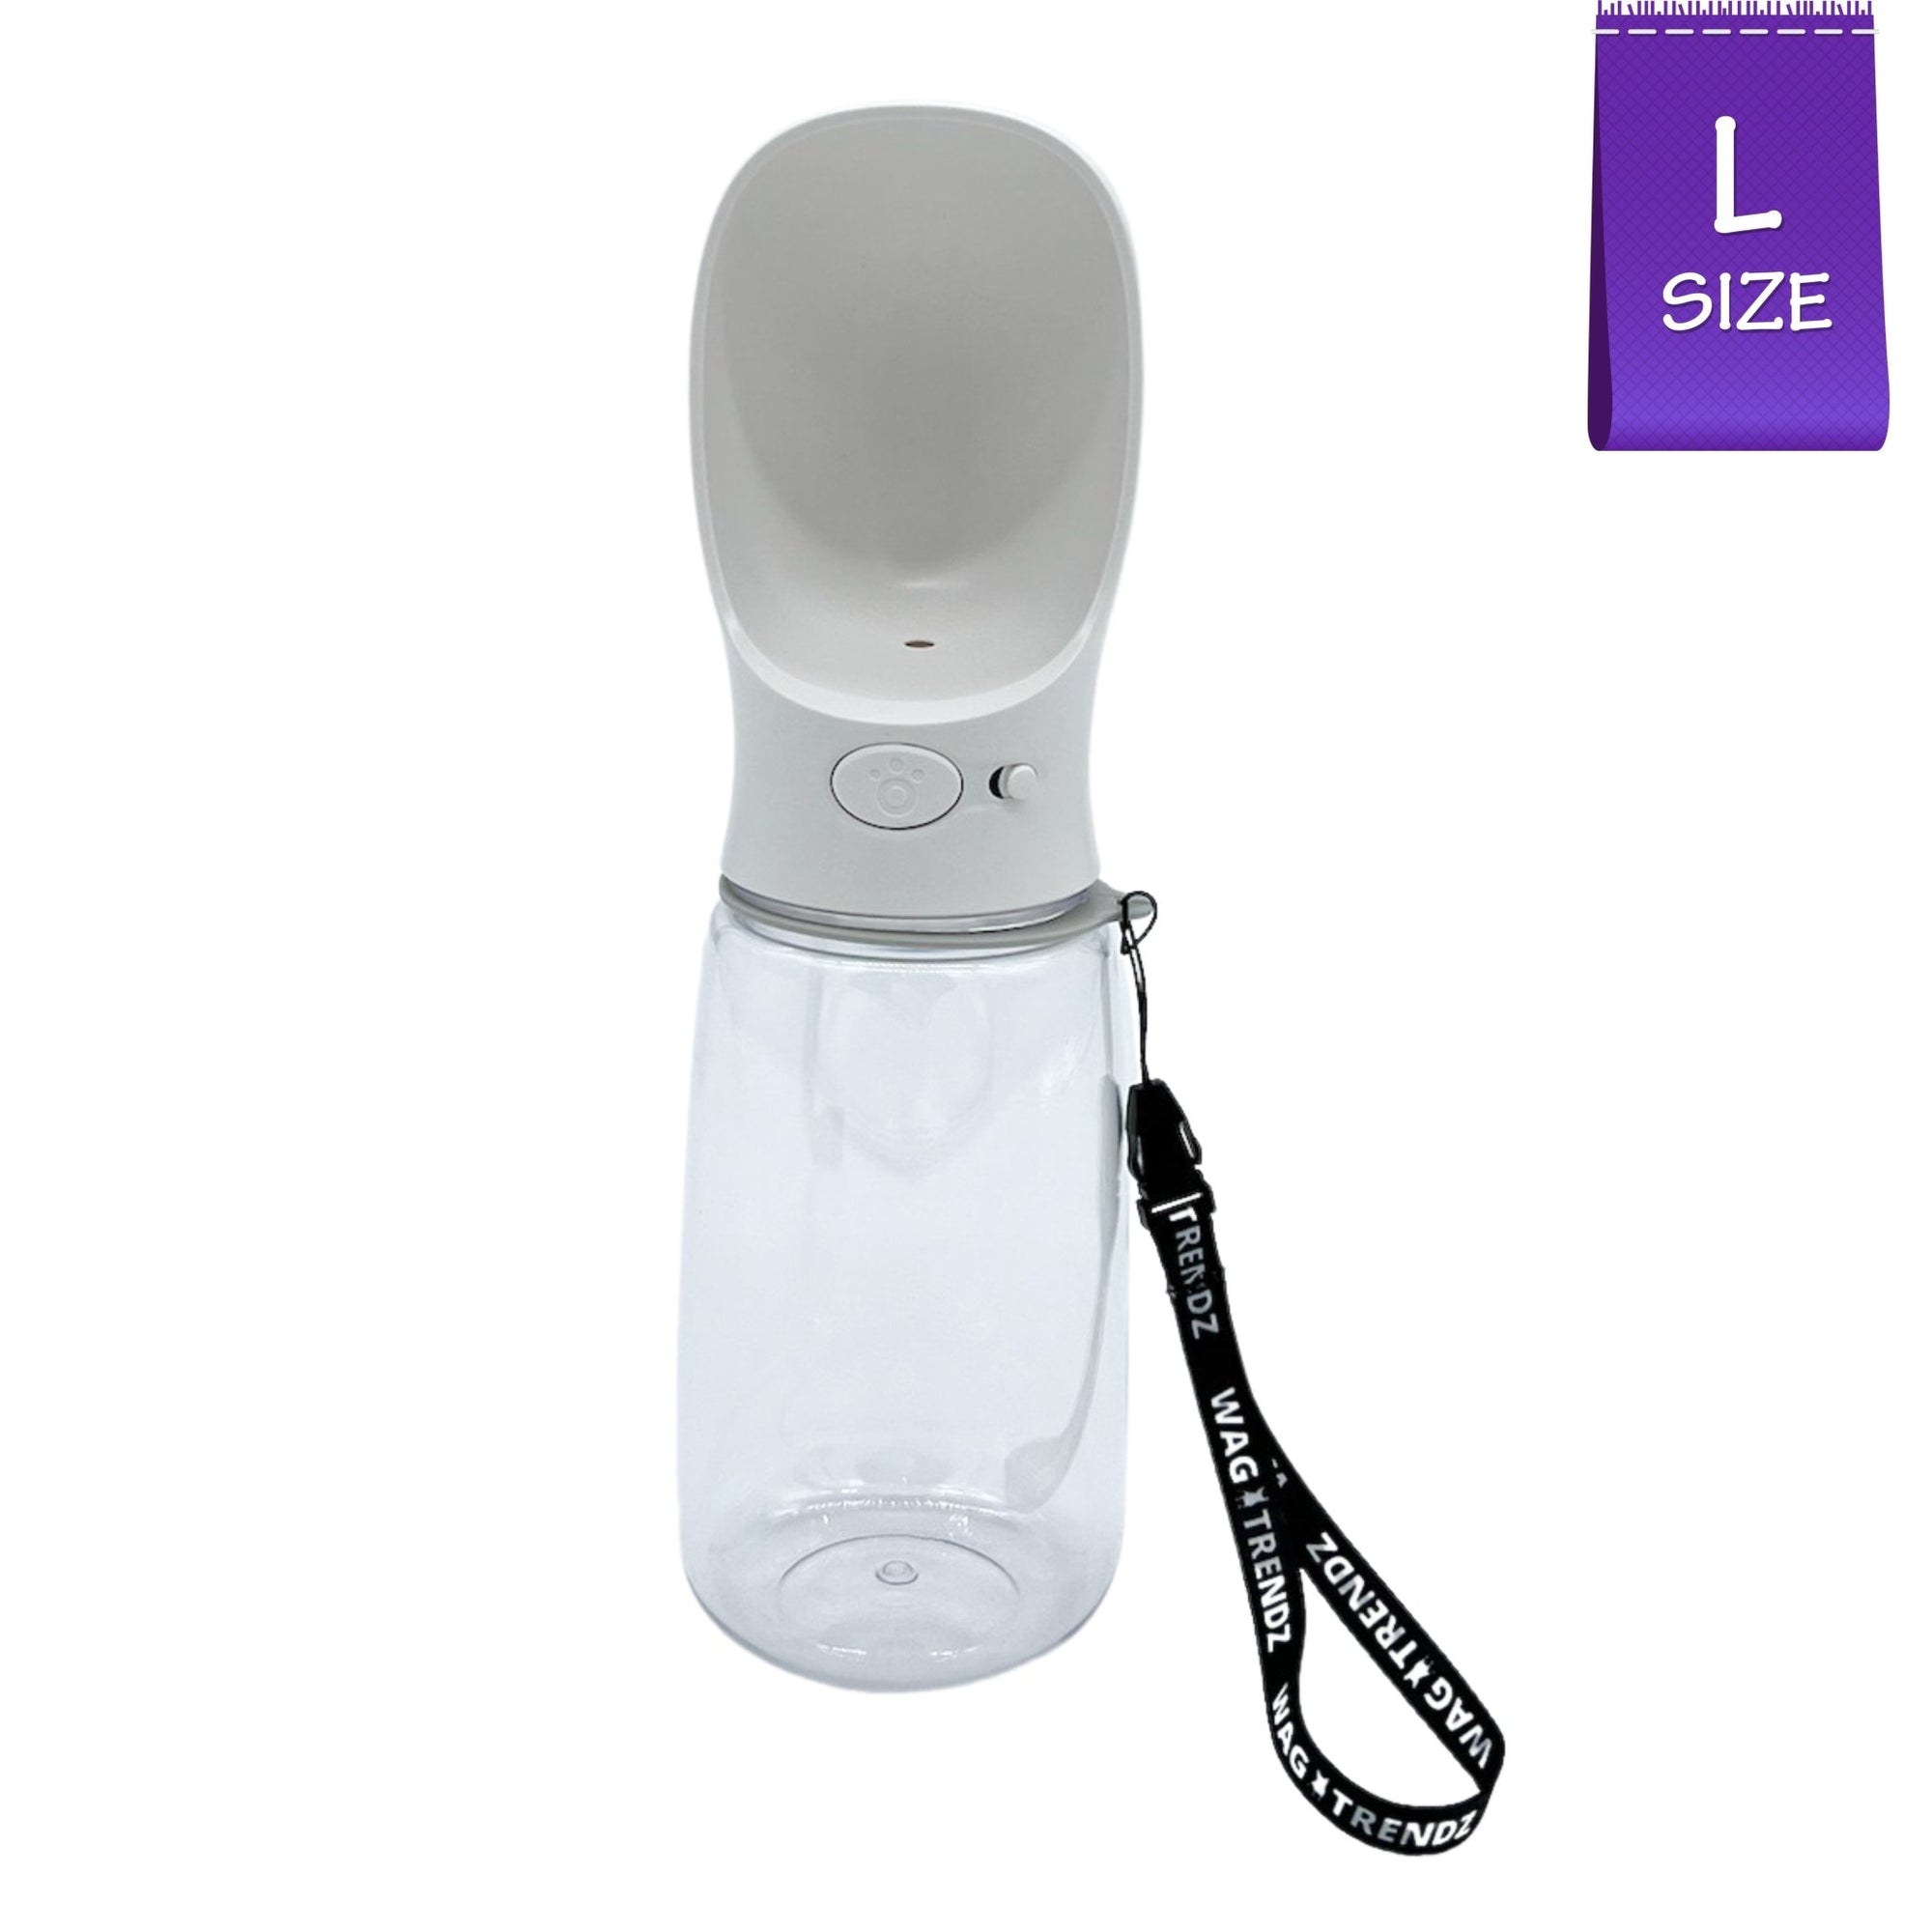 Dog Portable Water Bottle - white with black &amp; white logo strap - large - against solid white background - Wag Trendz